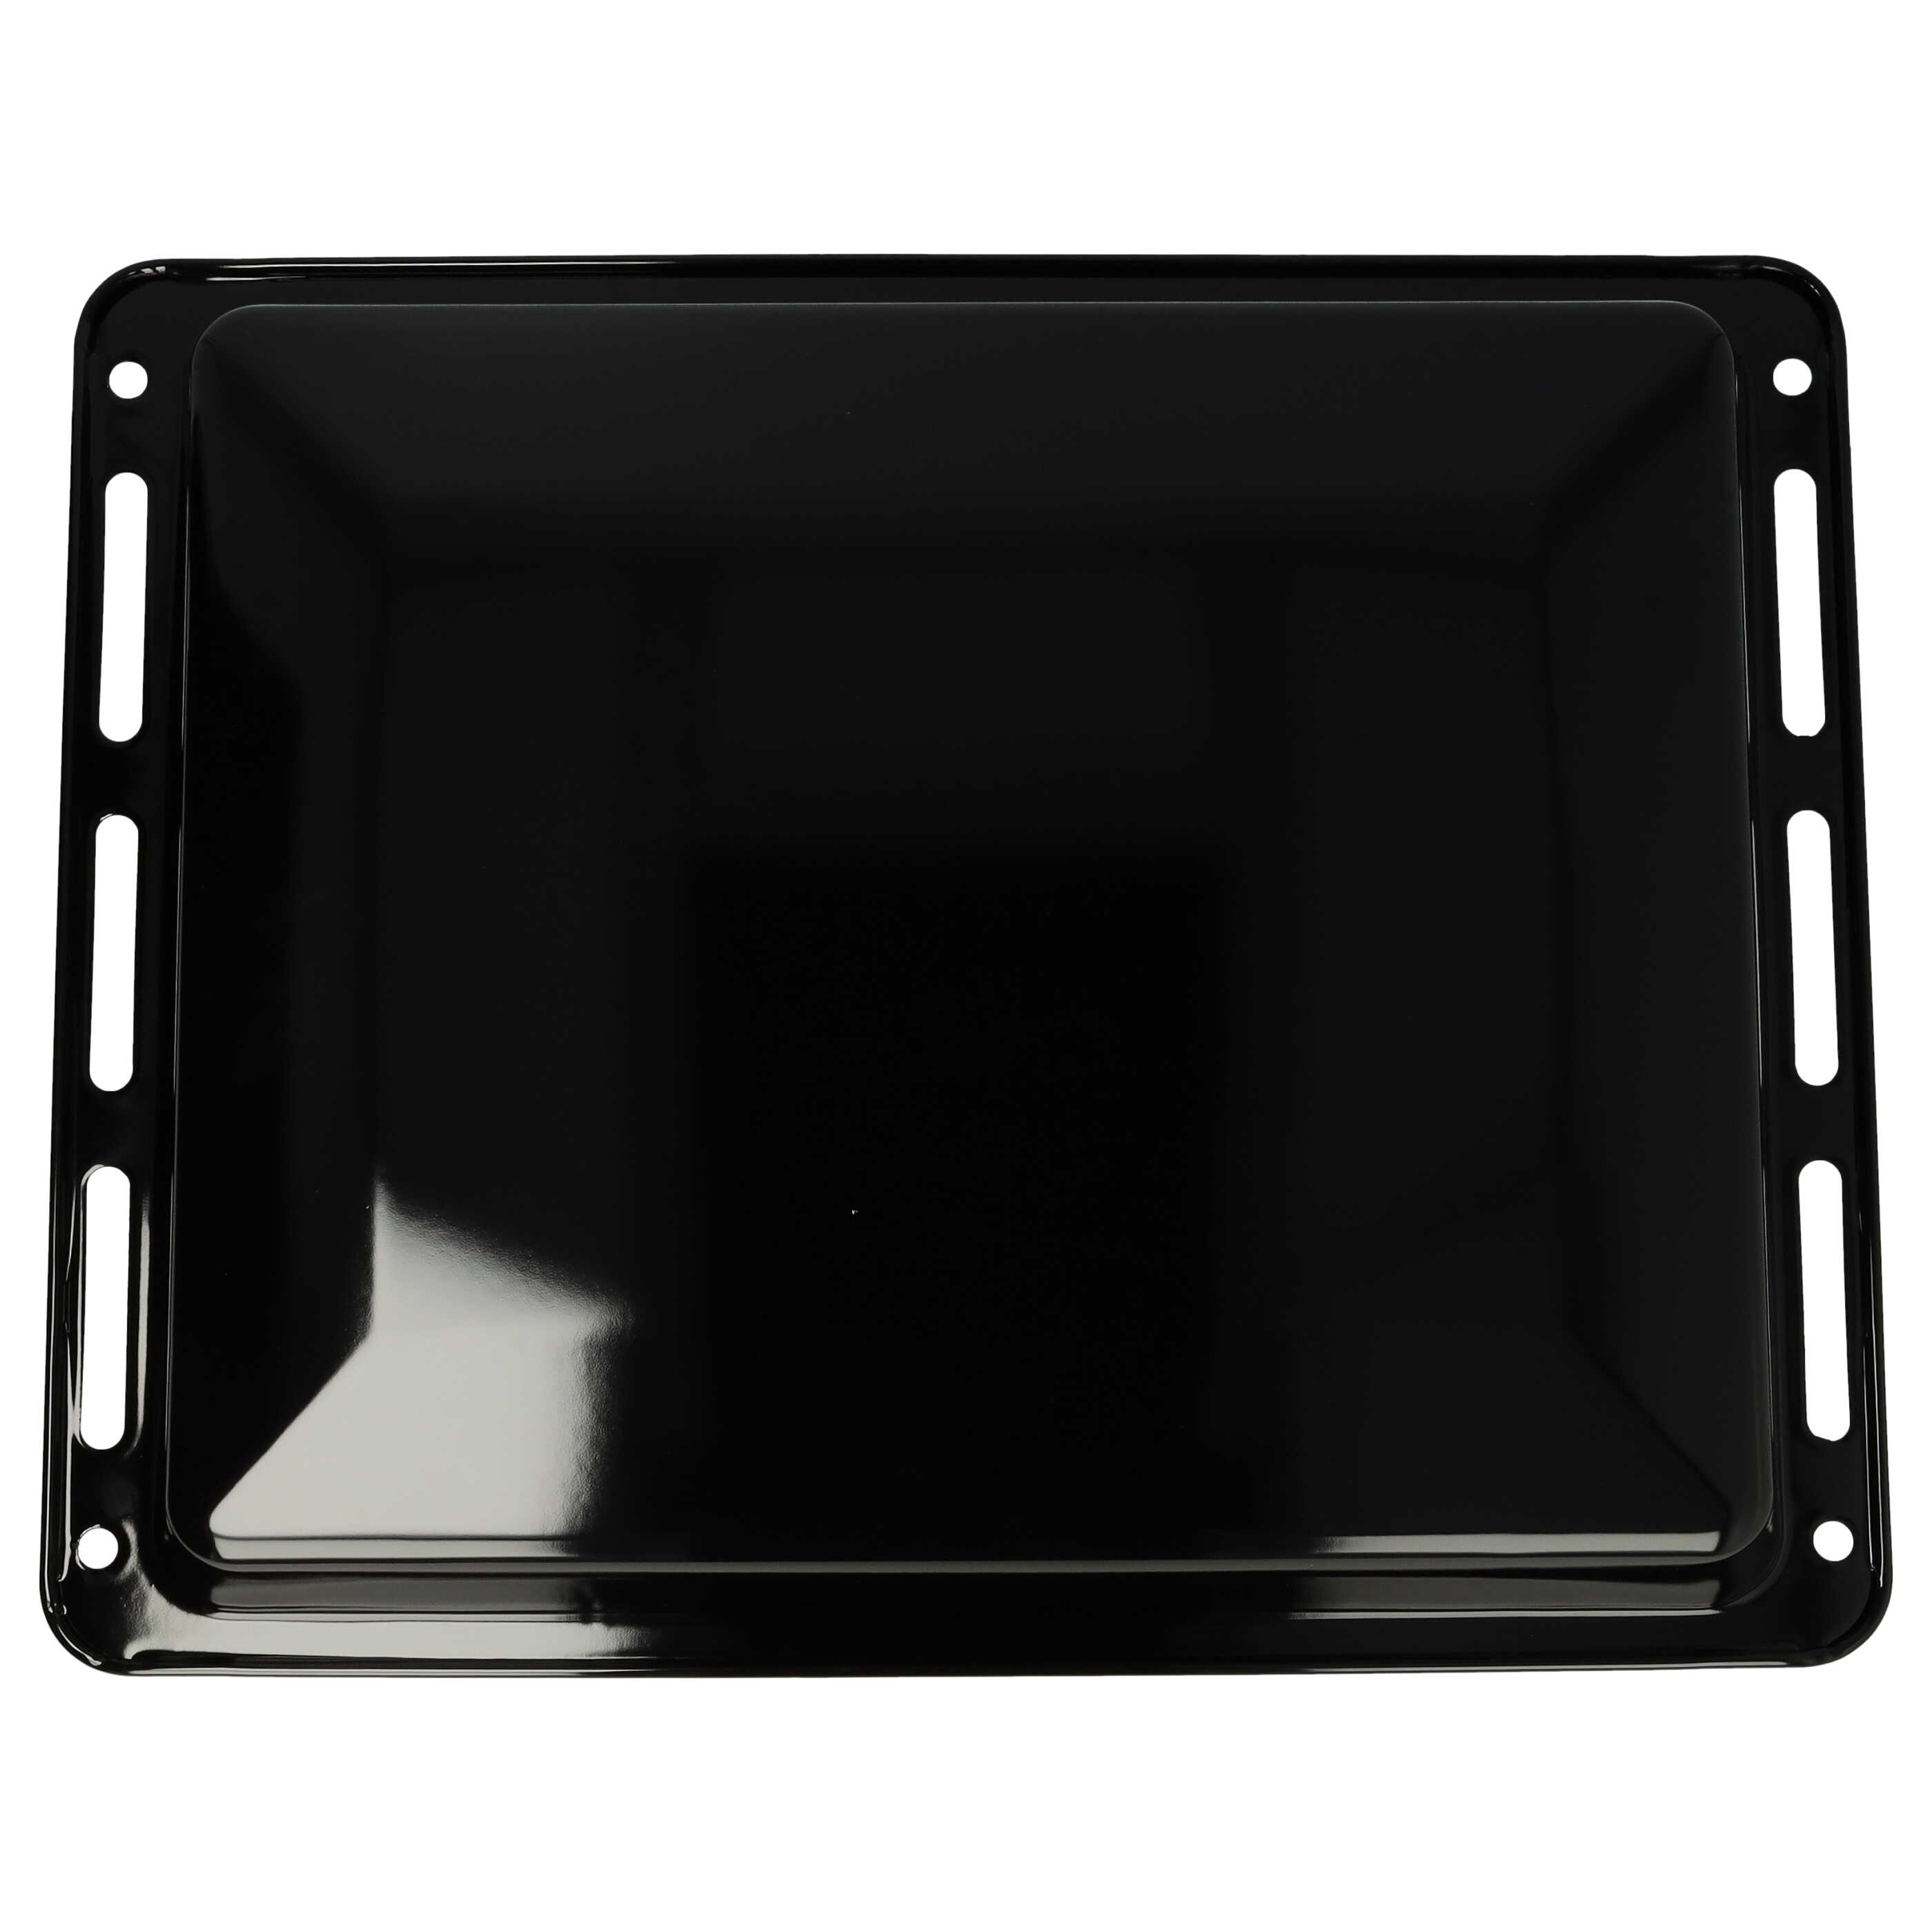 Baking Tray as Replacement for Bosch 11029050, 1101433, HEZ631070 Oven - 45.8 x 36.5 x 4 cm